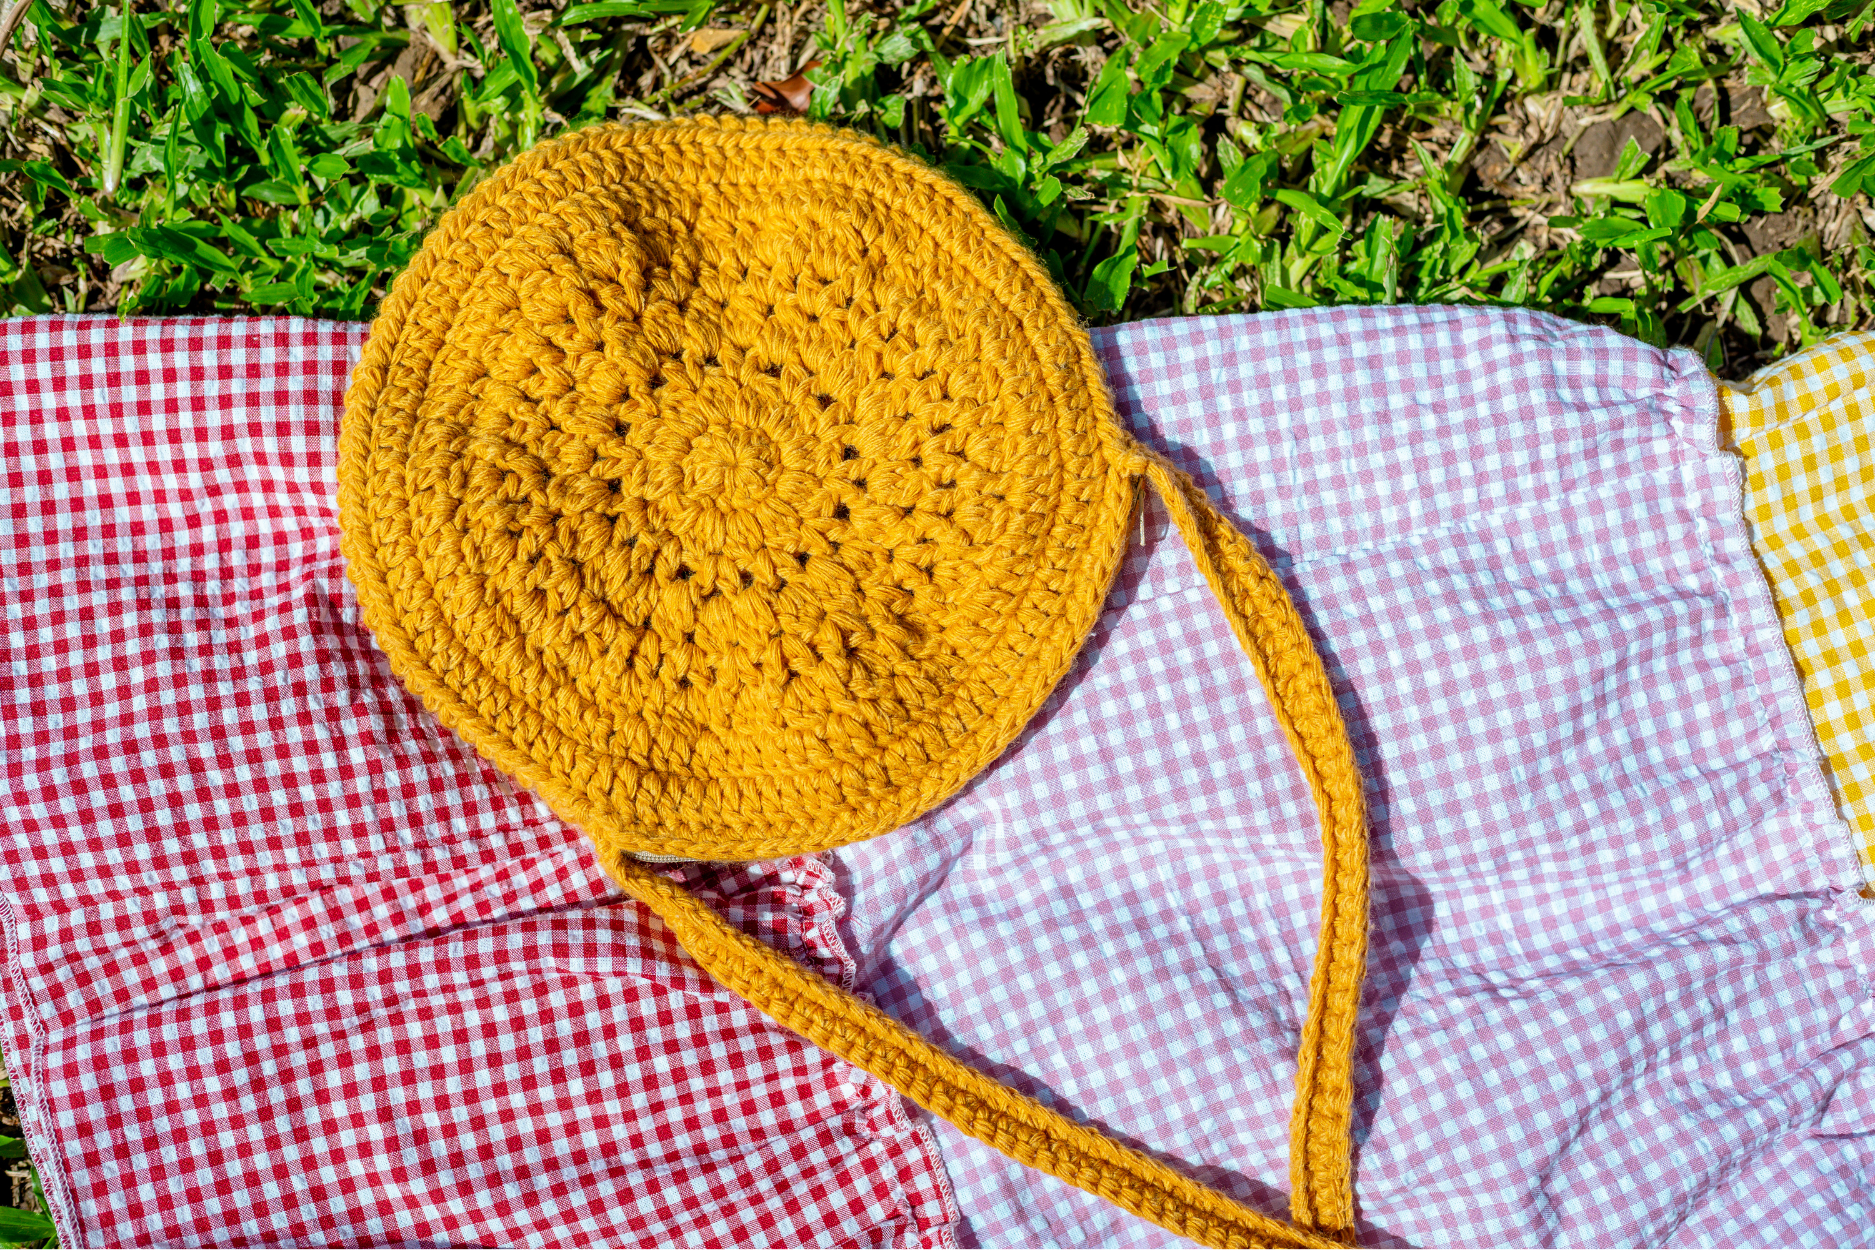 Should You Wash Crochet Items Before Selling?